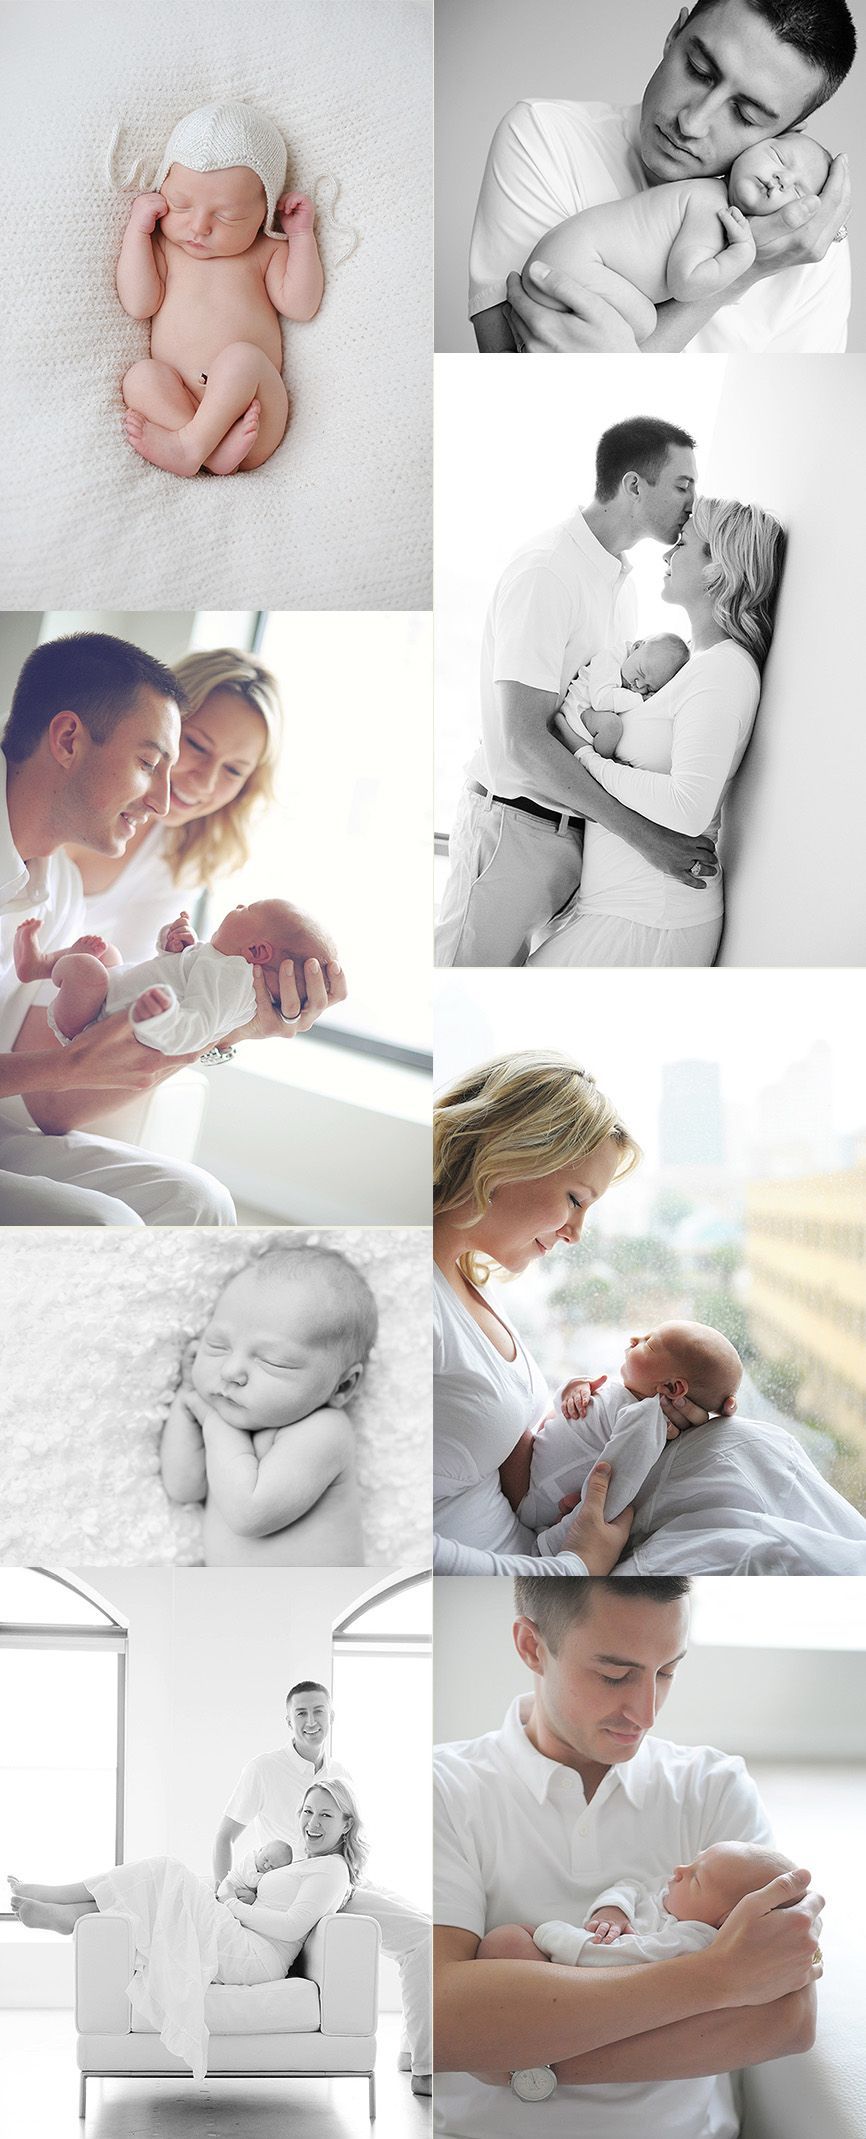 The perfect first baby photo package. Simple, beautiful, concise, sweet. I would